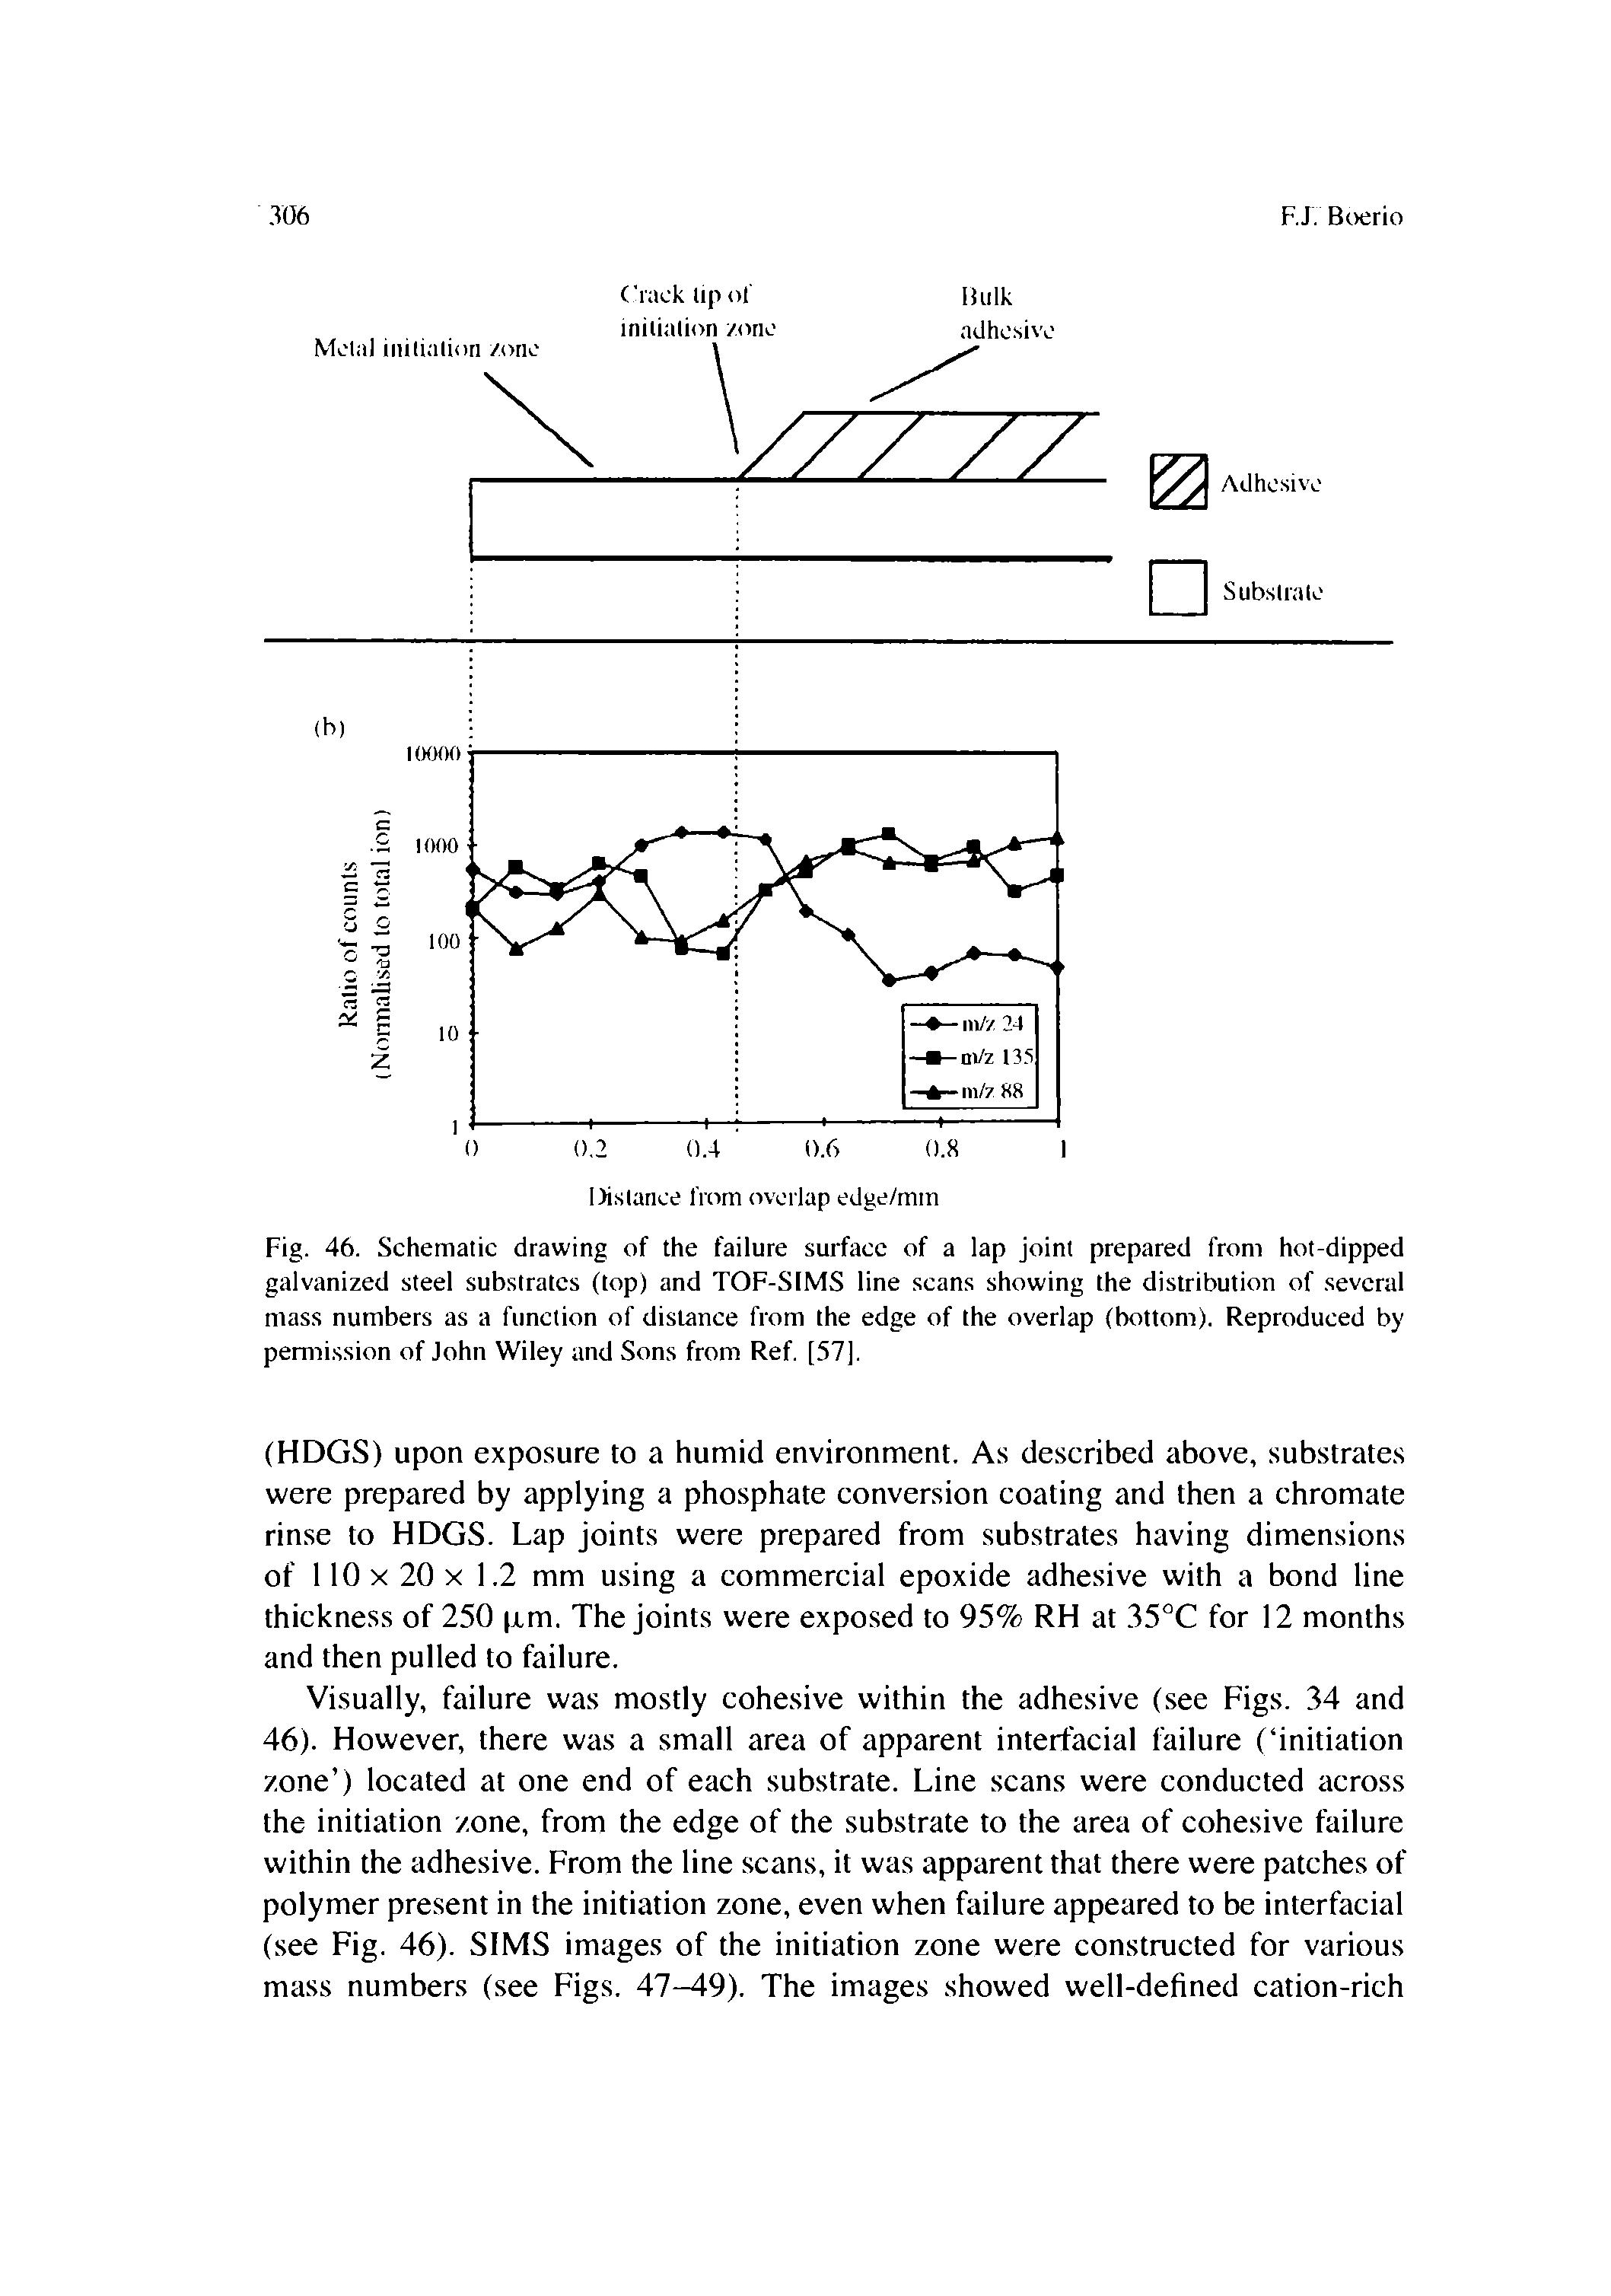 Fig. 46. Schematic drawing of the failure surface of a lap joint prepared from hot-dipped galvanized steel substrates (top) and TOF-SIMS line scans showing the distribution of several mass numbers as a function of distance from the edge of the overlap (bottom). Reproduced by permission of John Wiley and Sons from Ref. [57].